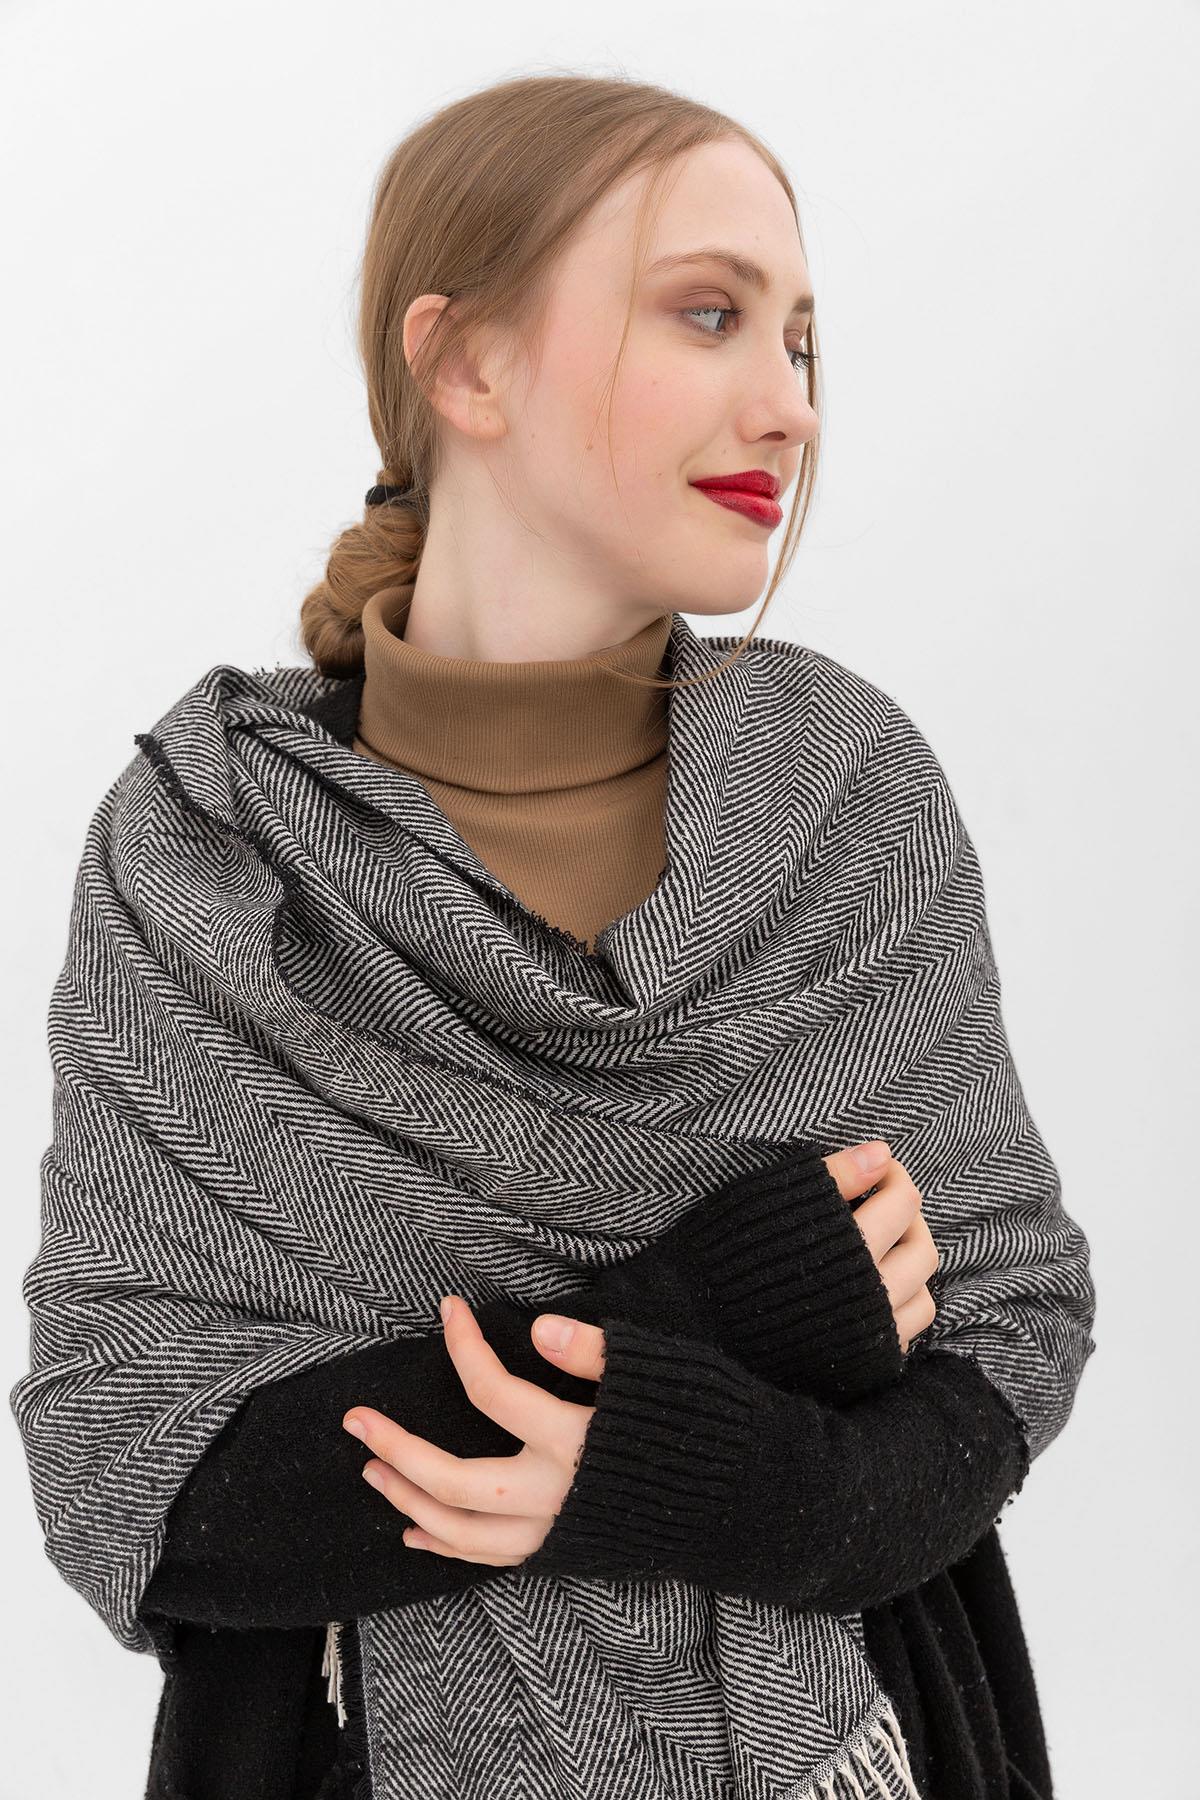 A model wears NSV10801 - Soft Textured Tasseled Thick Shoulder Shawl - Black, wholesale Shawl of Nesvay to display at Lonca